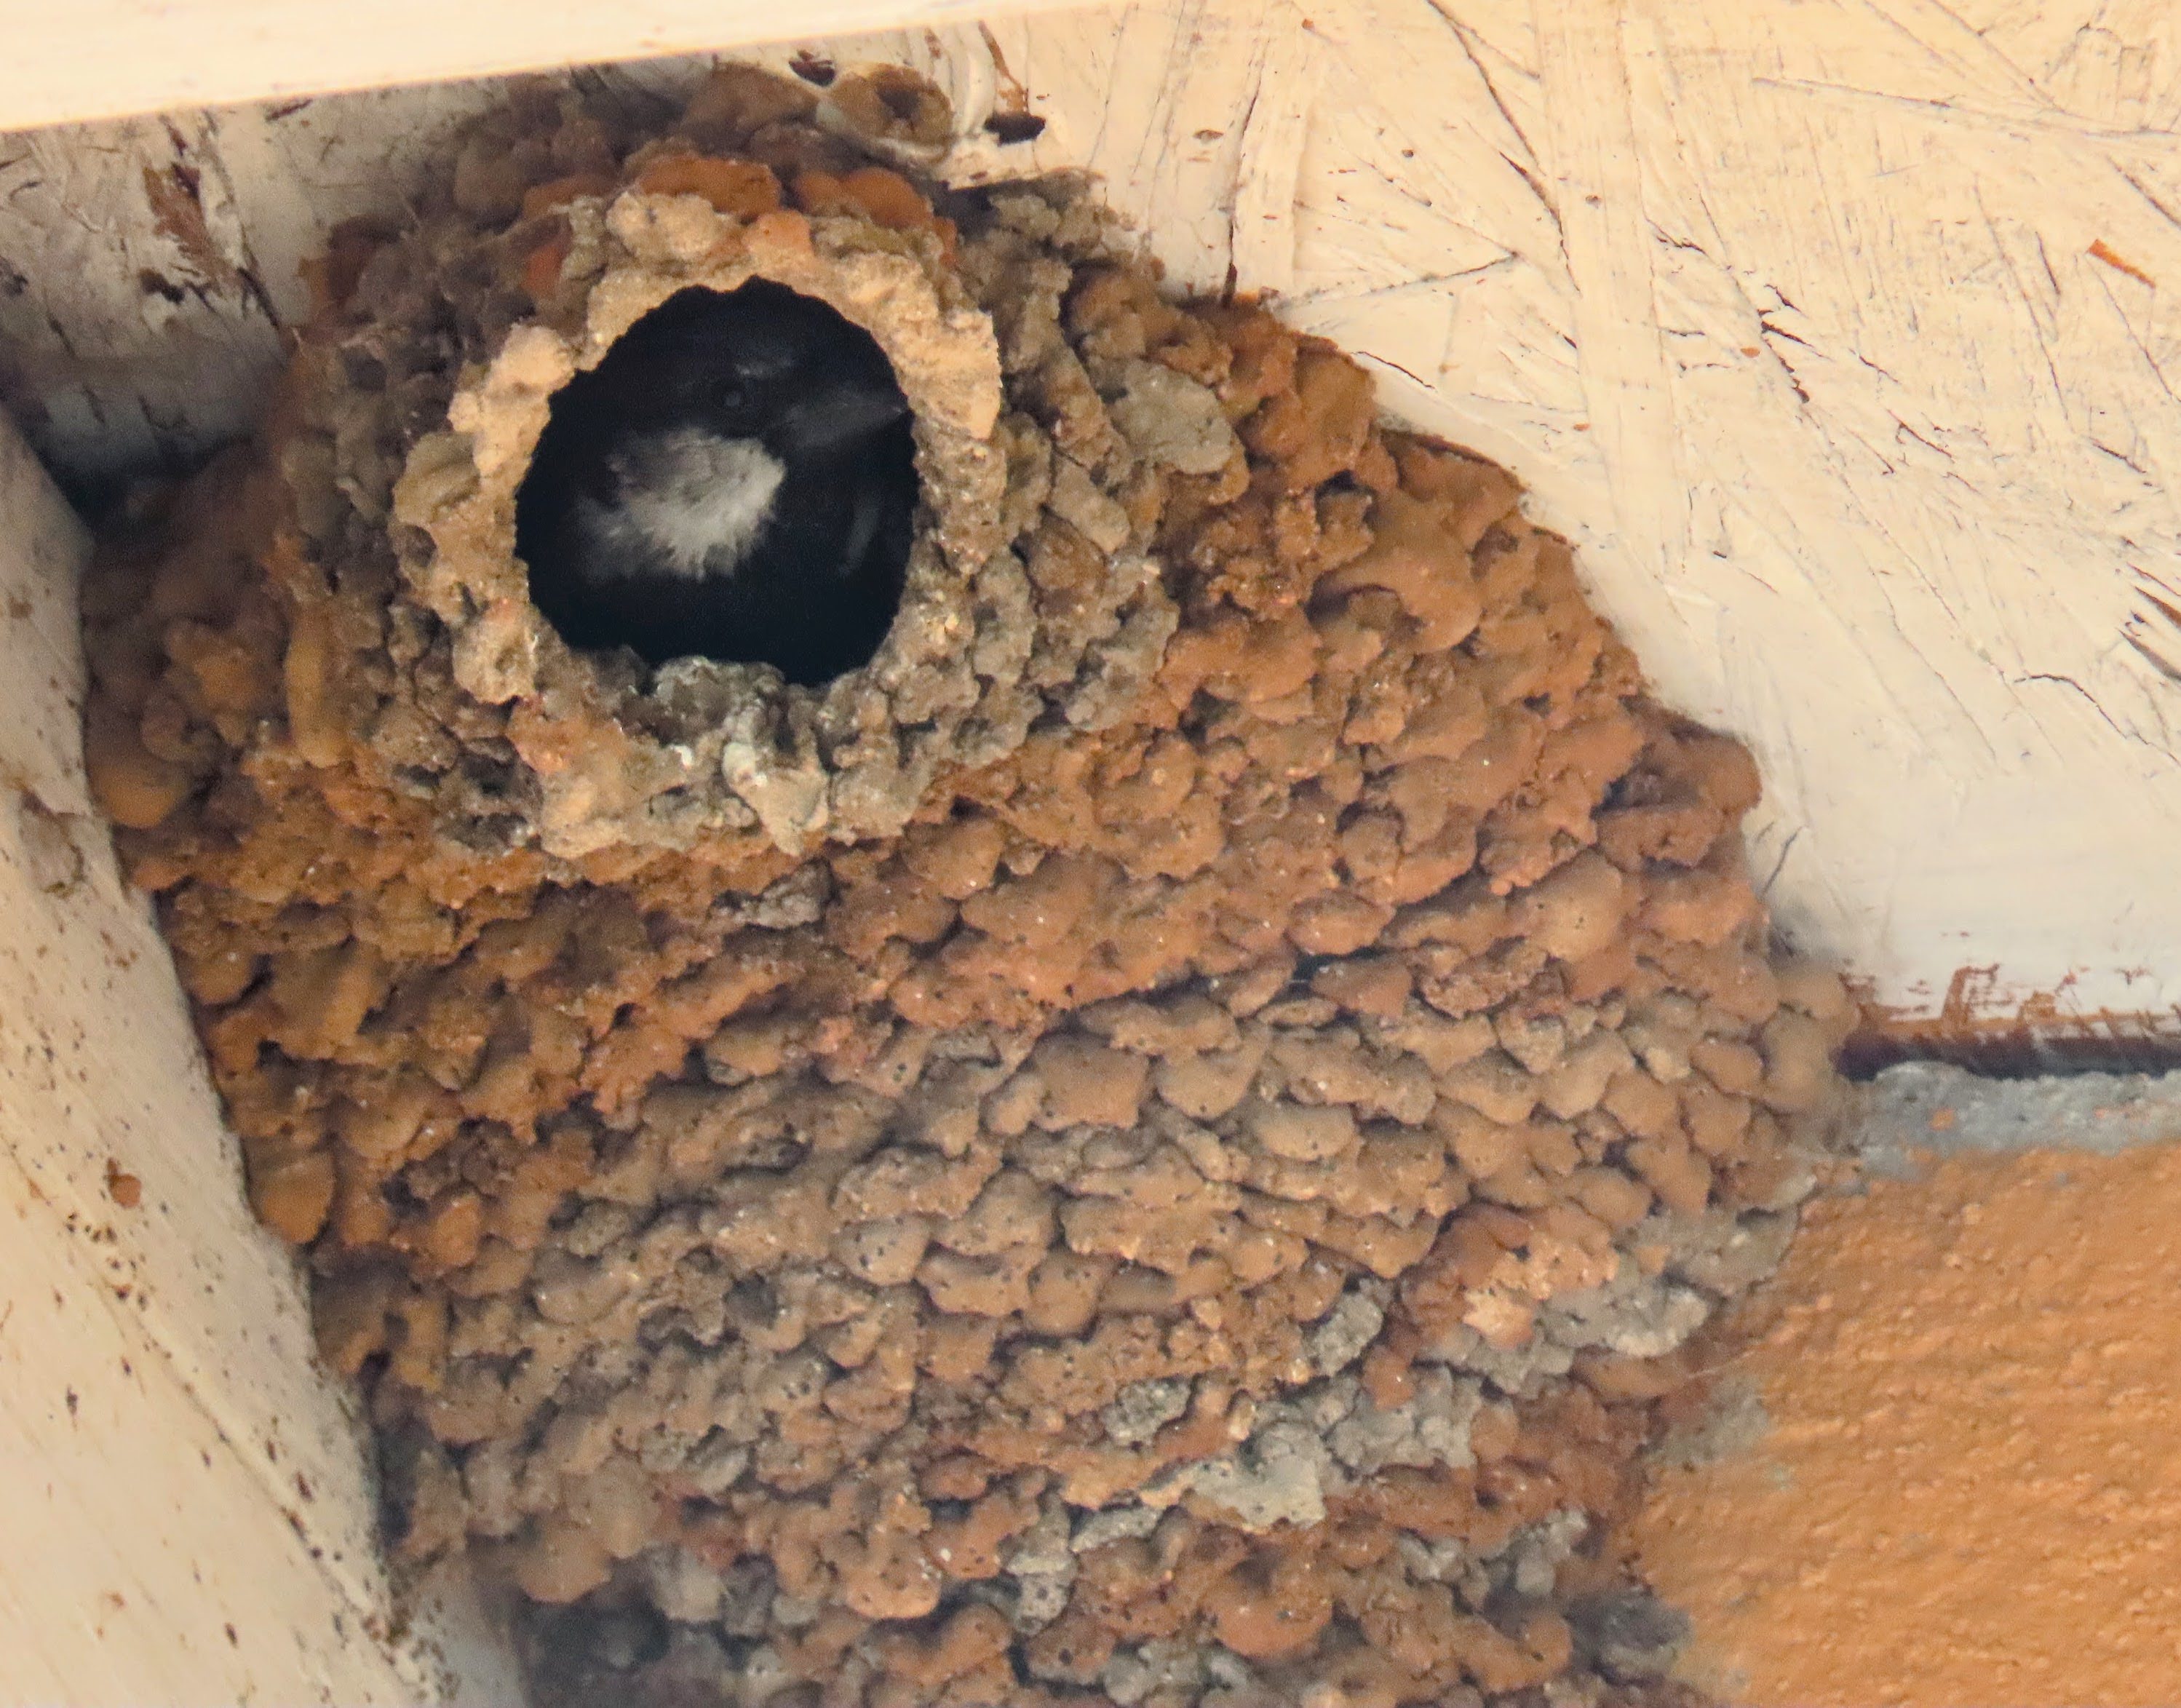 File:Swallow nest occupied by House Sparrow.jpg - Wikipedia